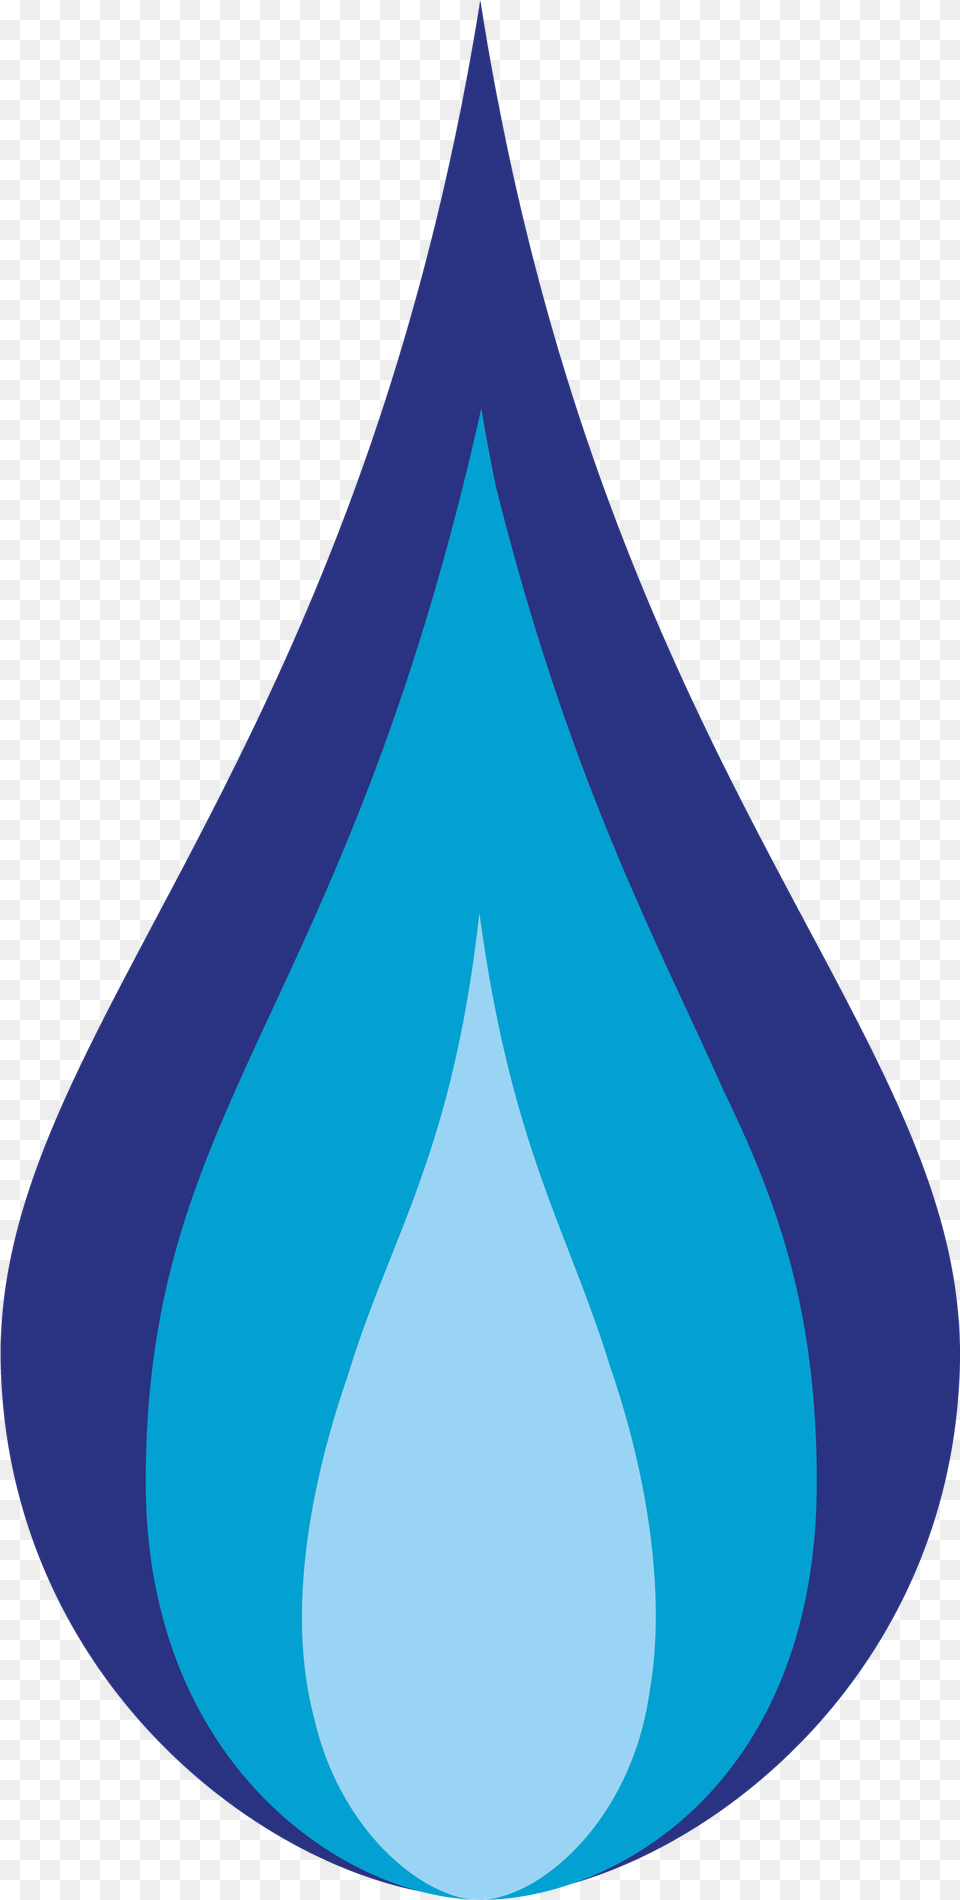 Amenti Blue Flame Rediscovery Press Bunsen Burner Blue Flame No Background, Droplet, Lighting, Fire Png Image